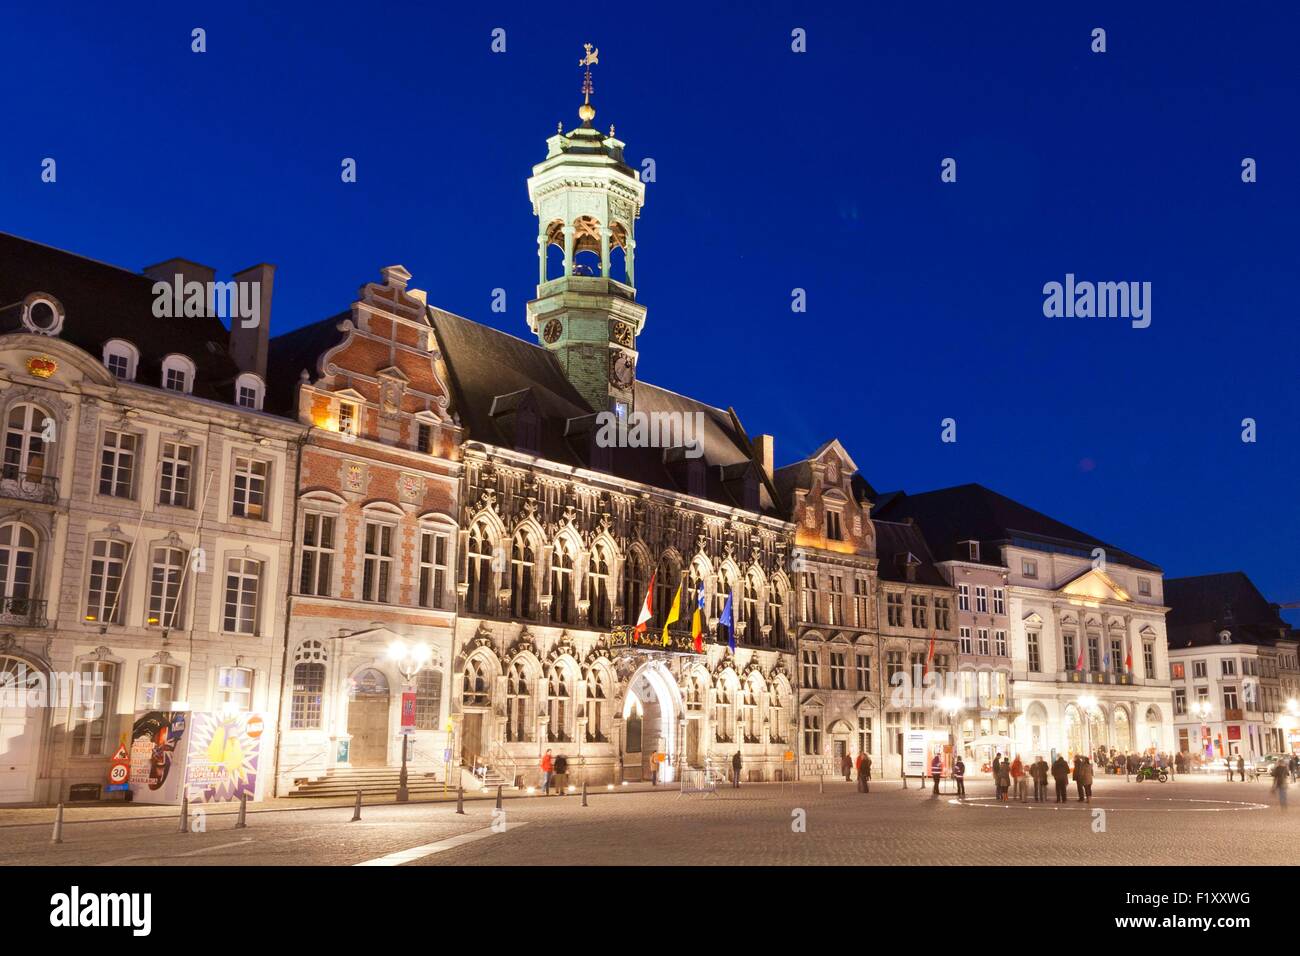 Belgium, Wallonia, Hainaut province, Mons, European Capital of Culture 2015, historical center, grand place and City Hall Stock Photo